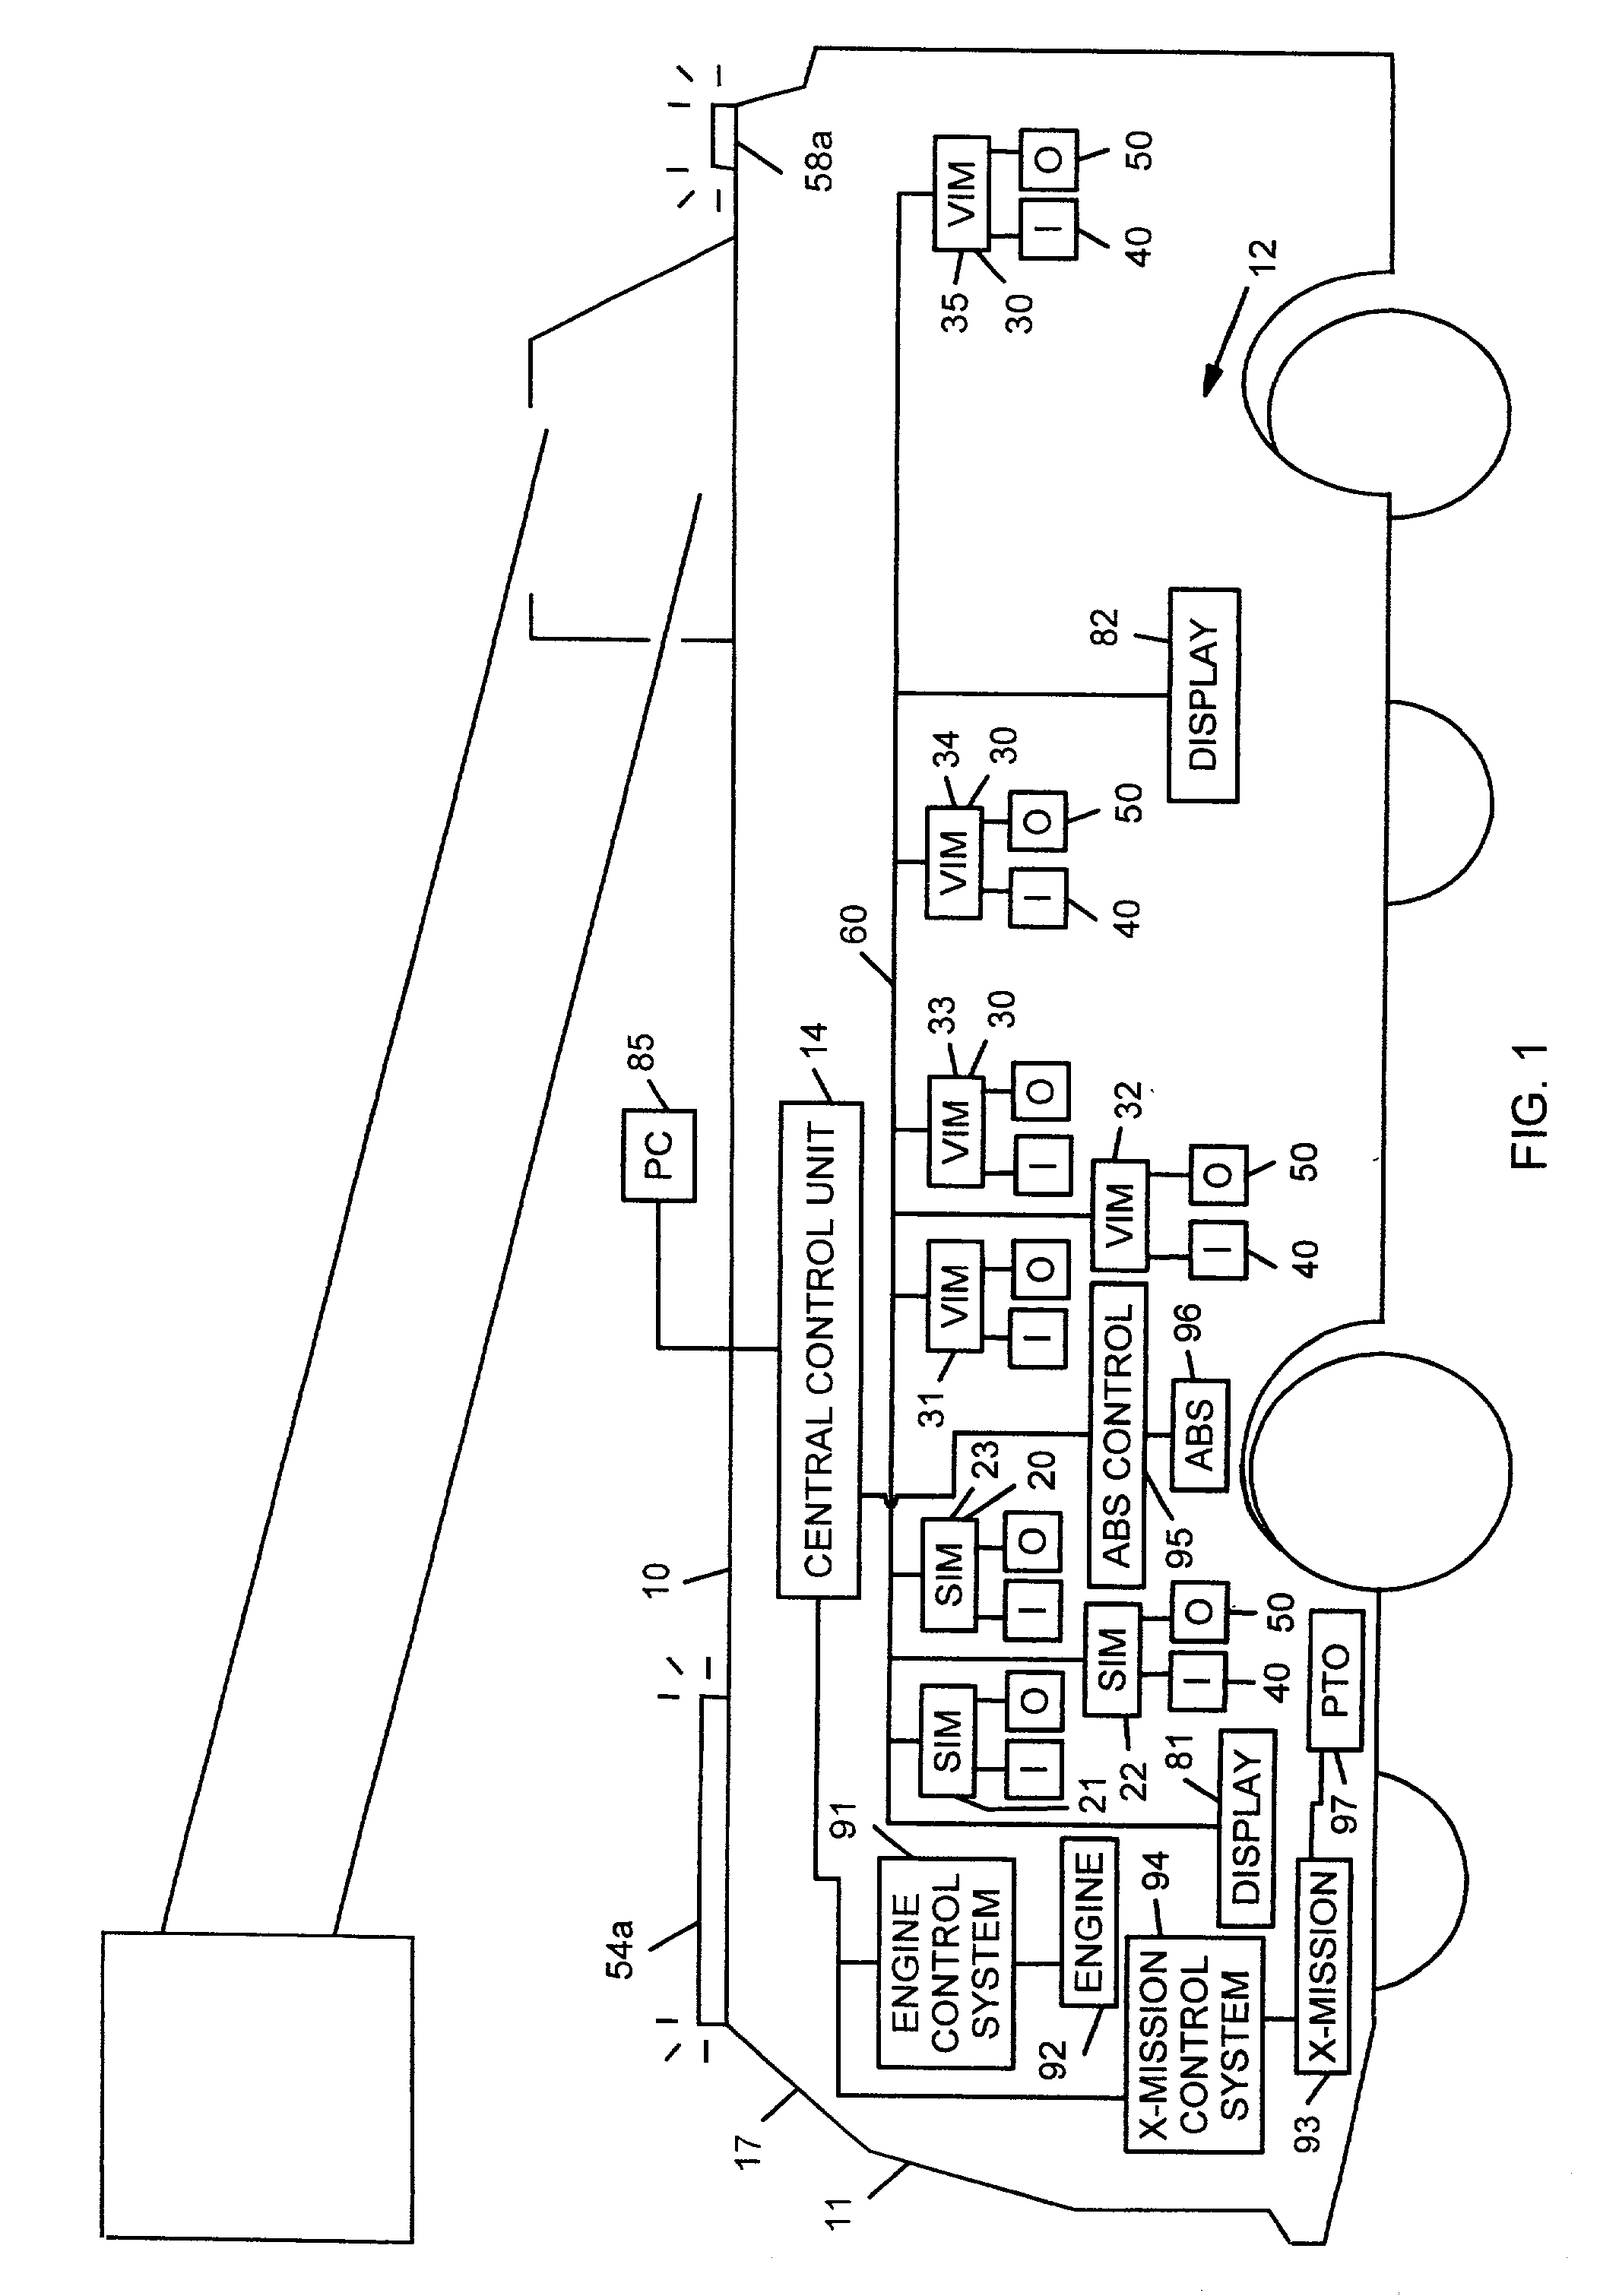 Military vehicle having cooperative control network with distributed I/O interfacing